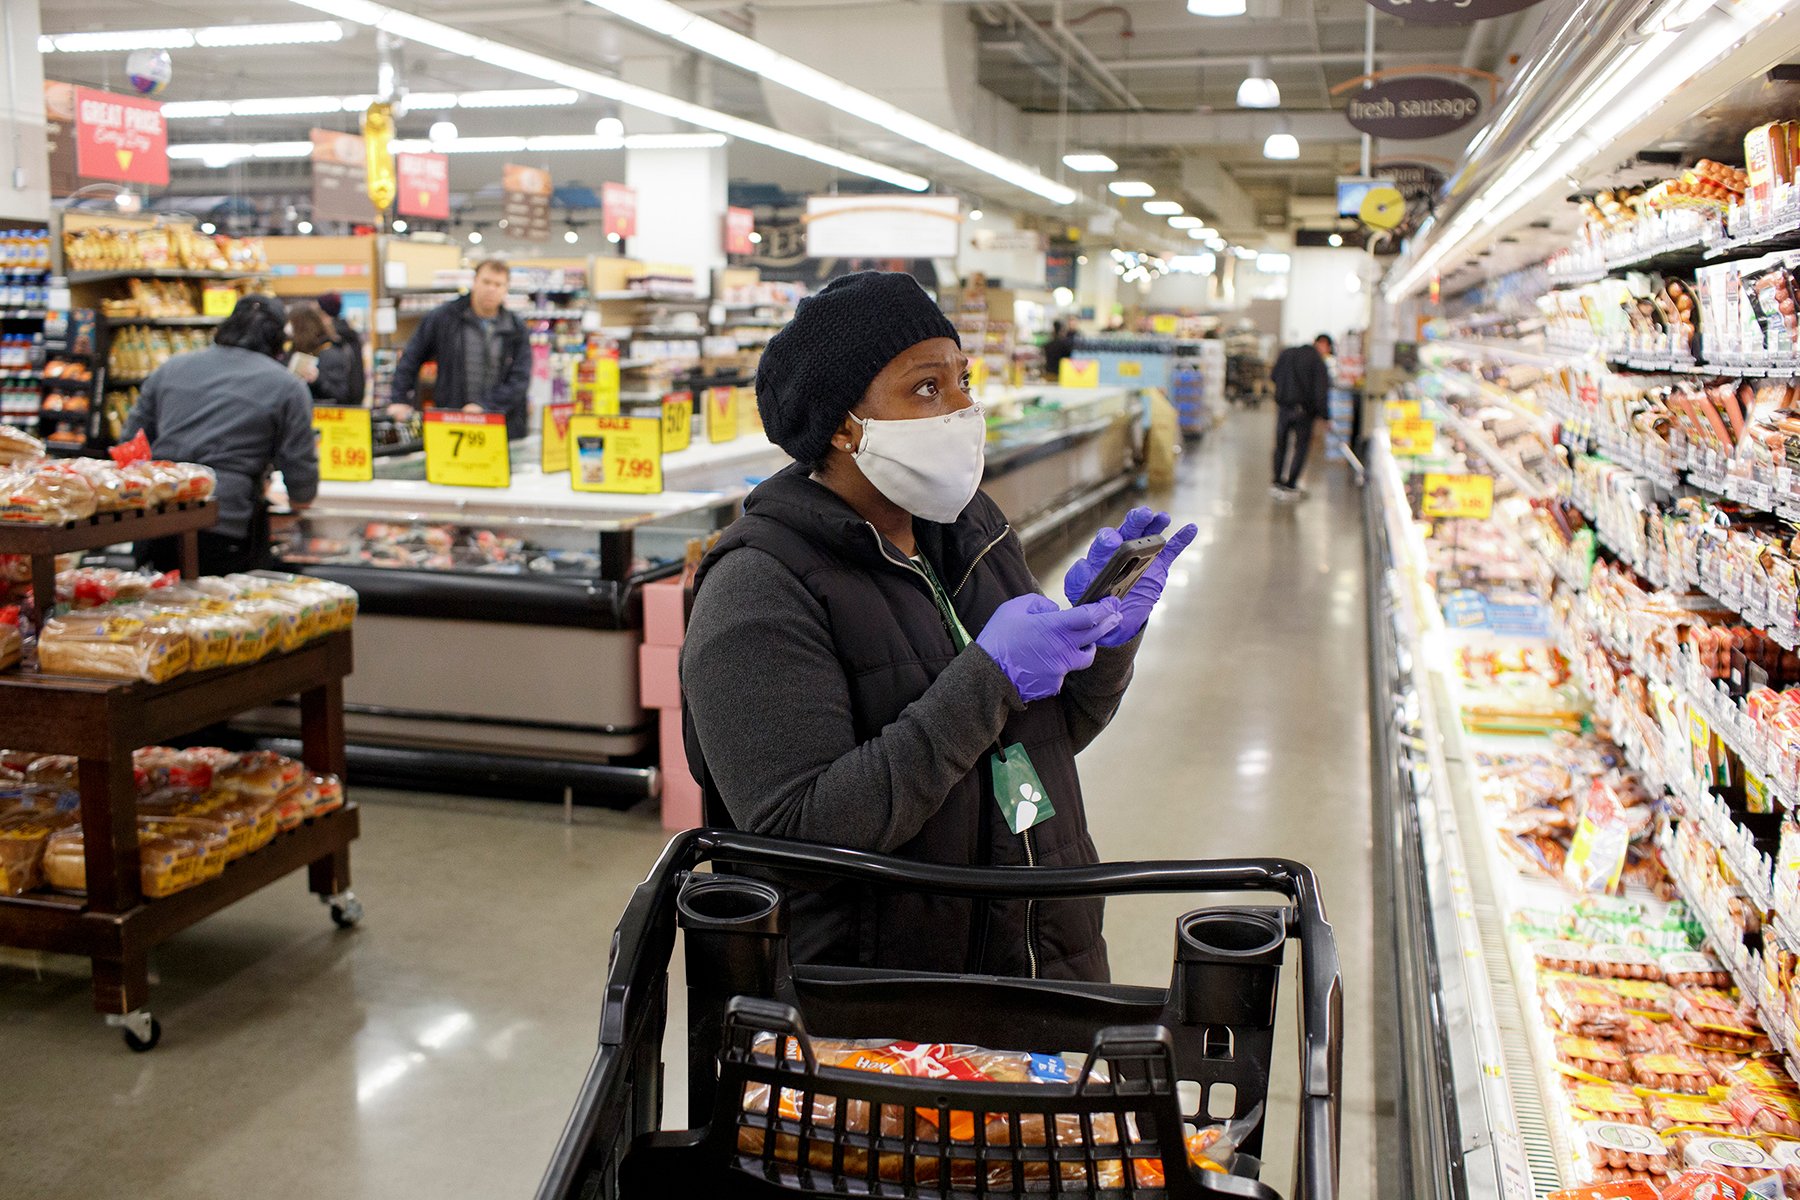 What It's Like to Work for Instacart During the Coronavirus Pandemic